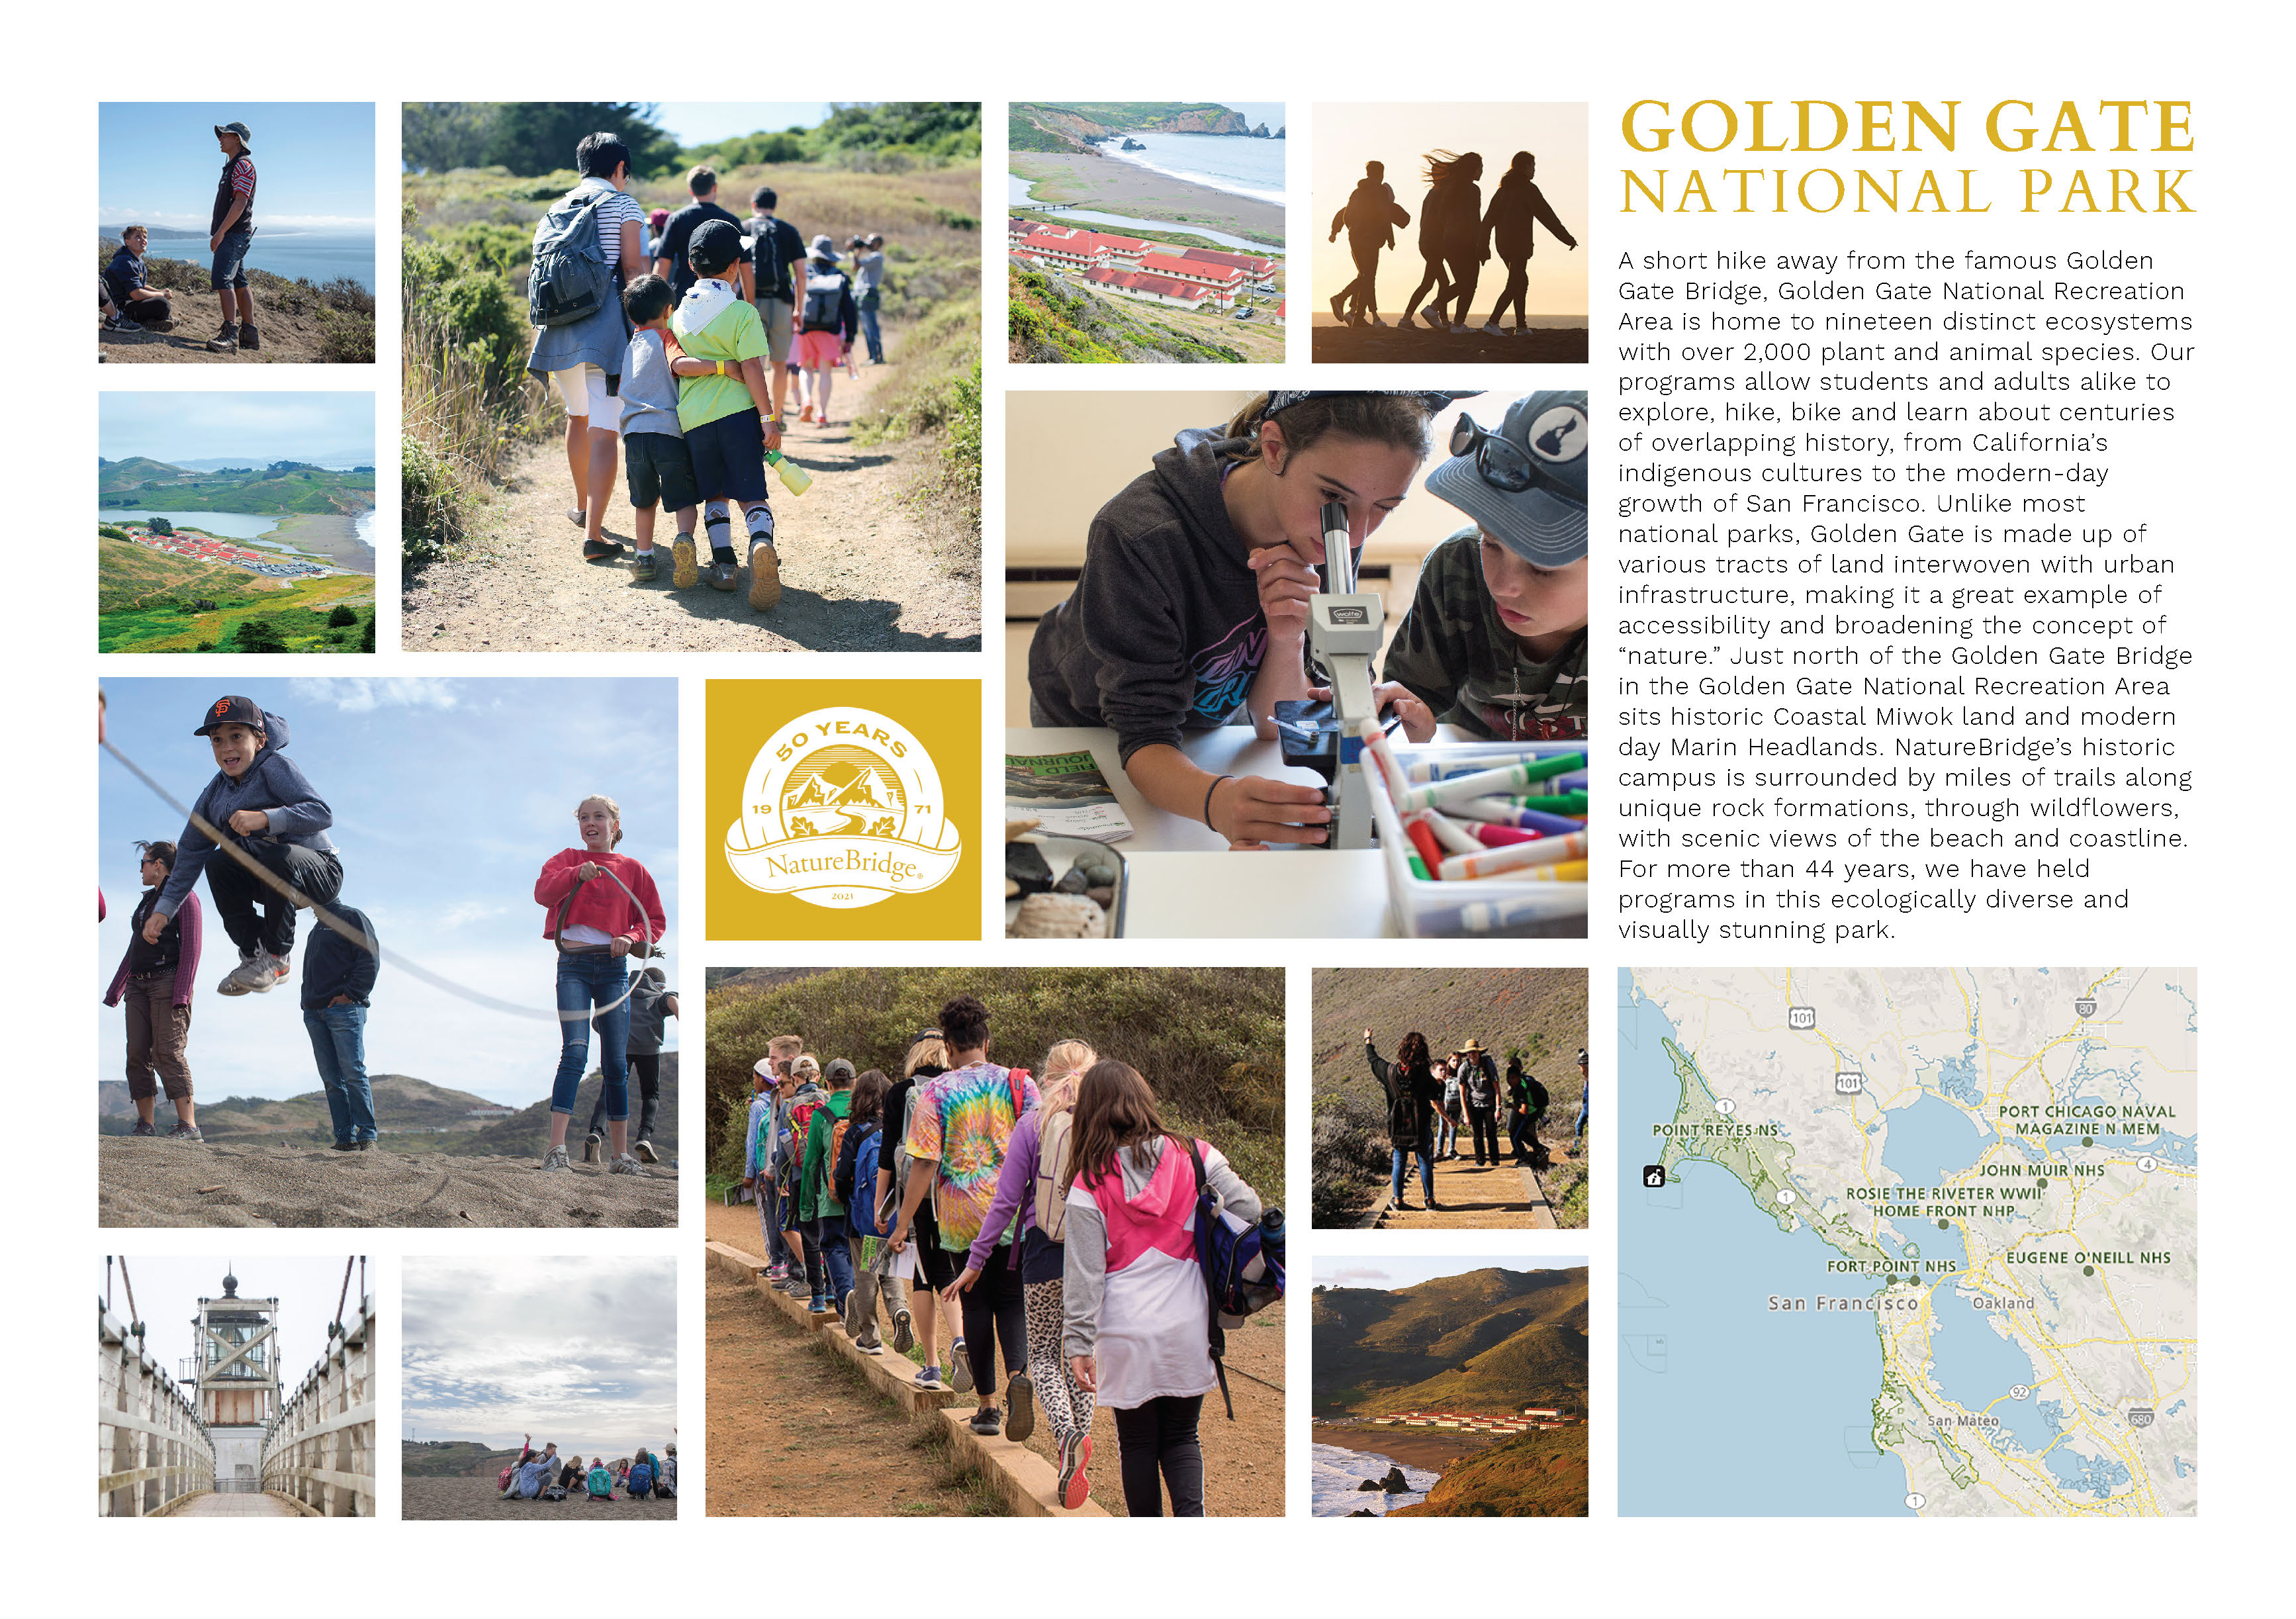 A collage of images from NatureBridge's Golden Gate campus